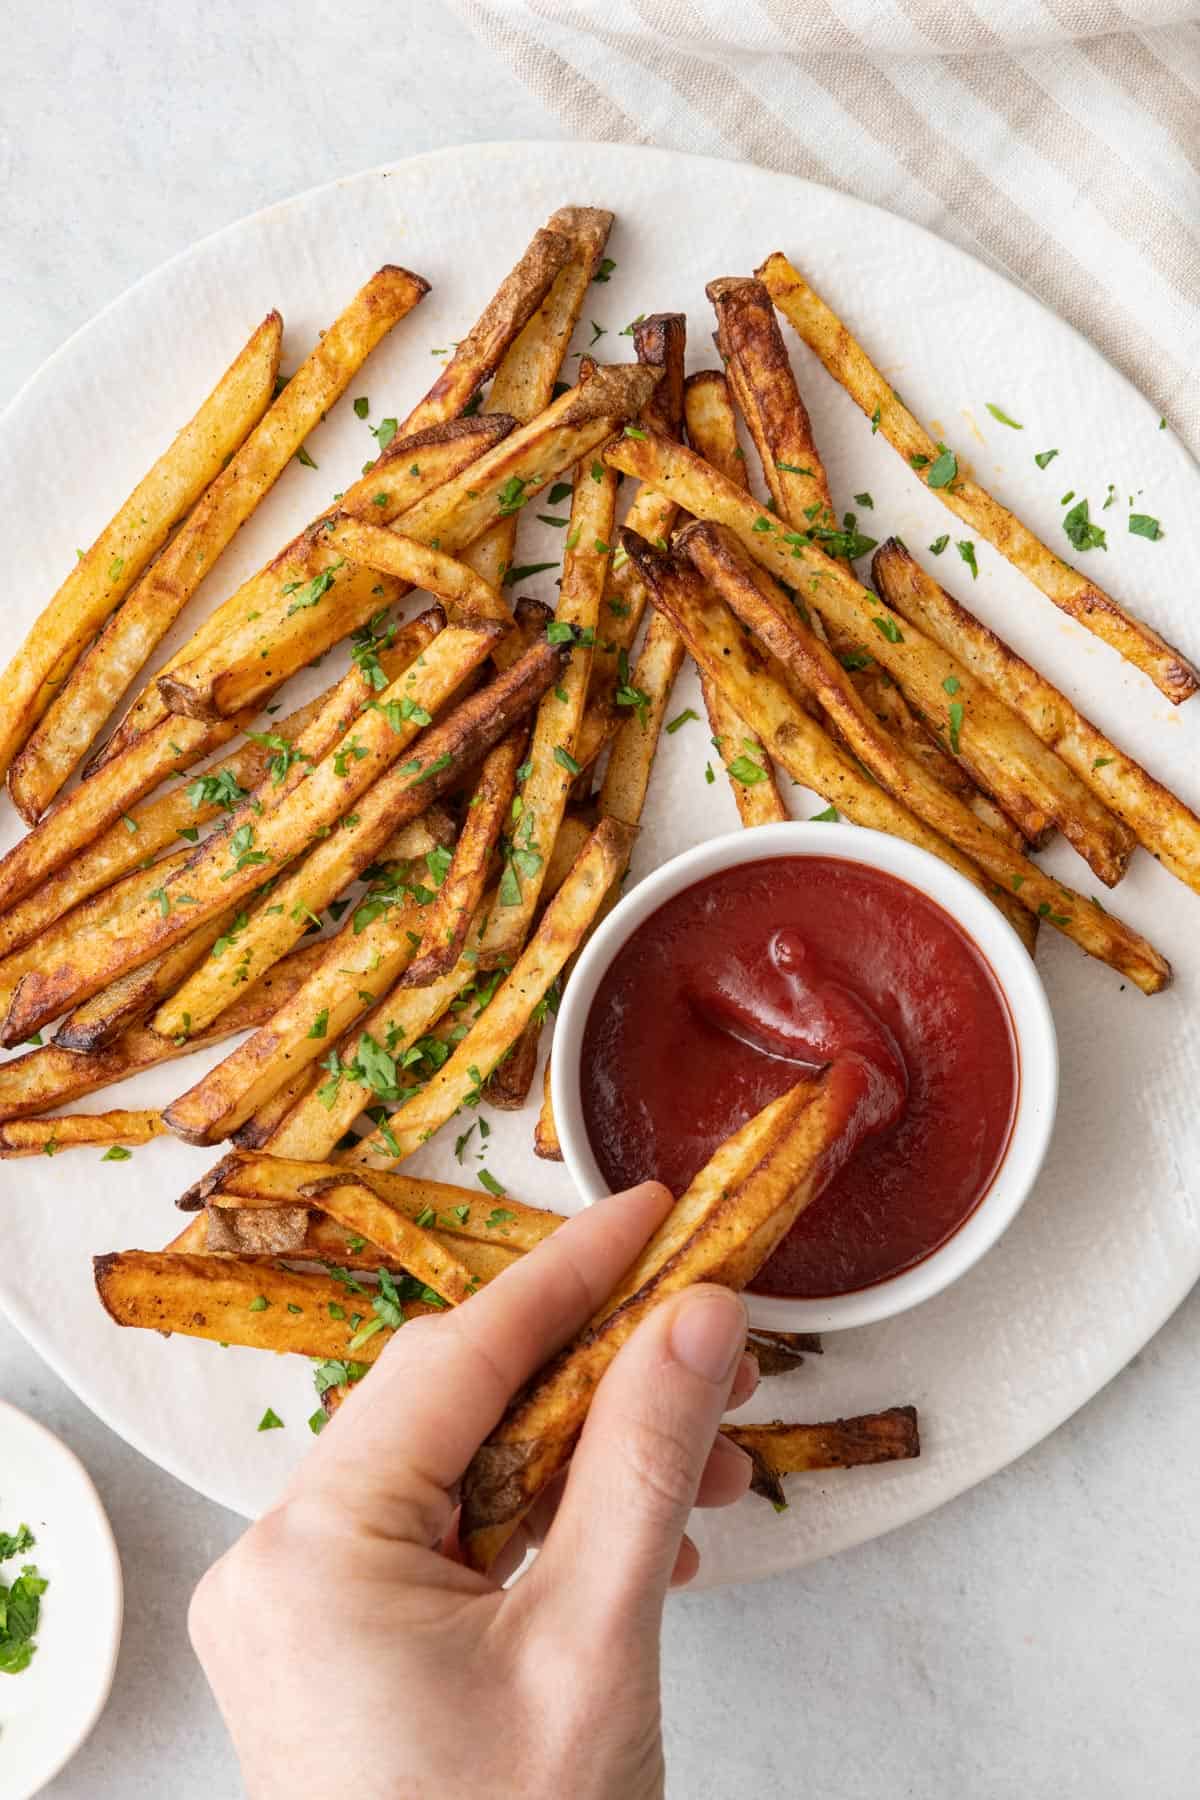 A plate of french fries garnished with parsley with a hand dipping a few into a small dish of ketchup.